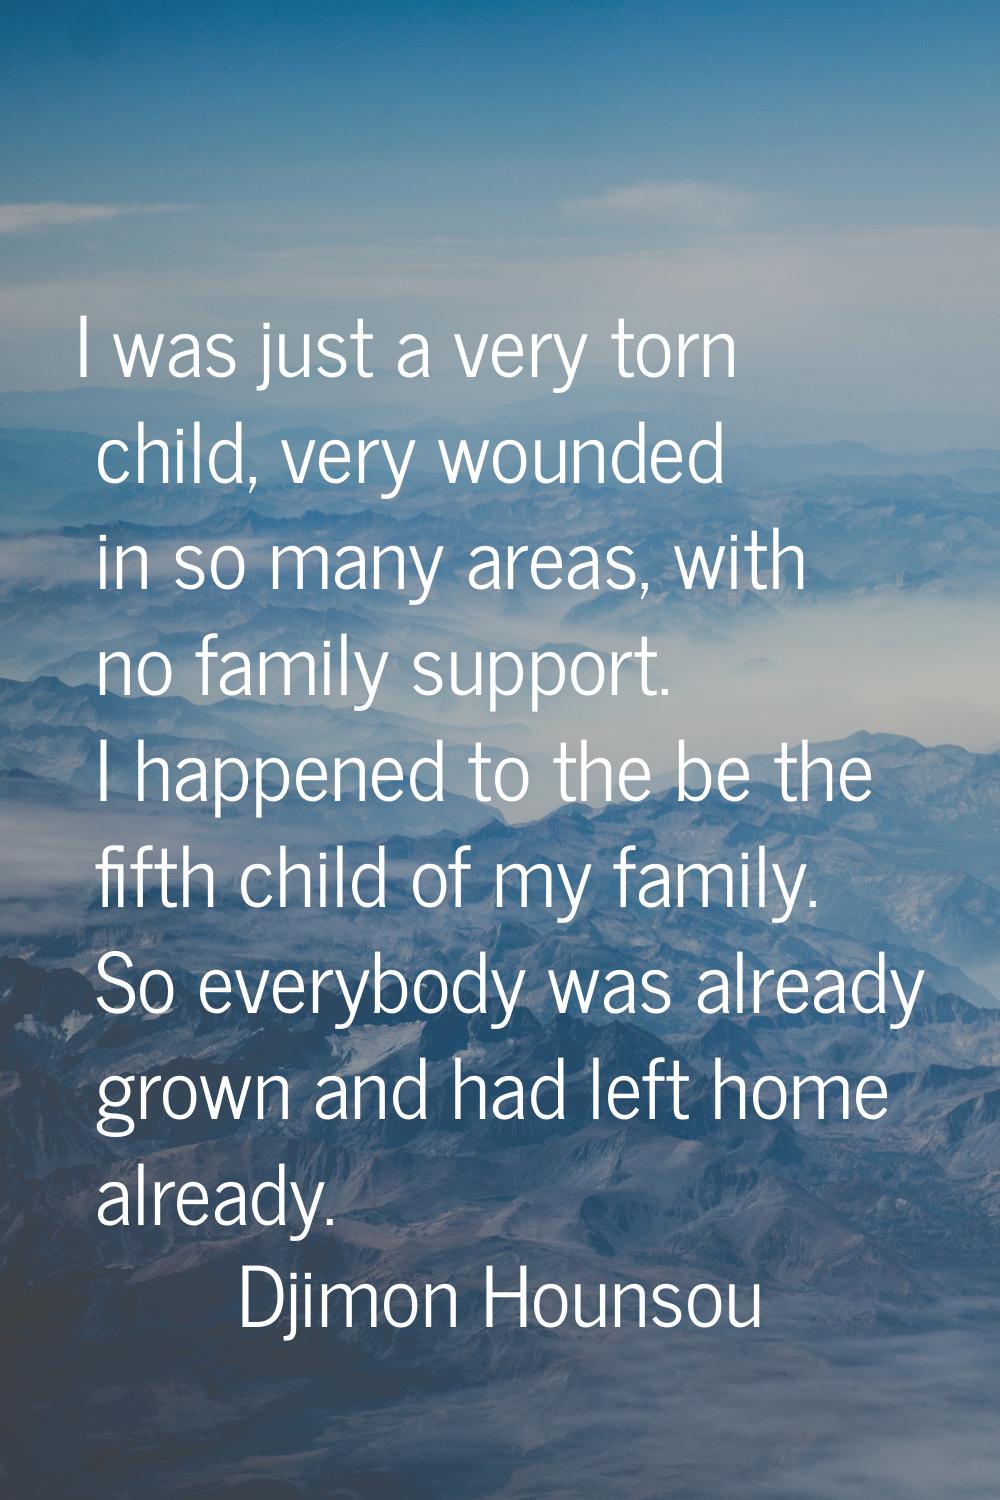 I was just a very torn child, very wounded in so many areas, with no family support. I happened to 